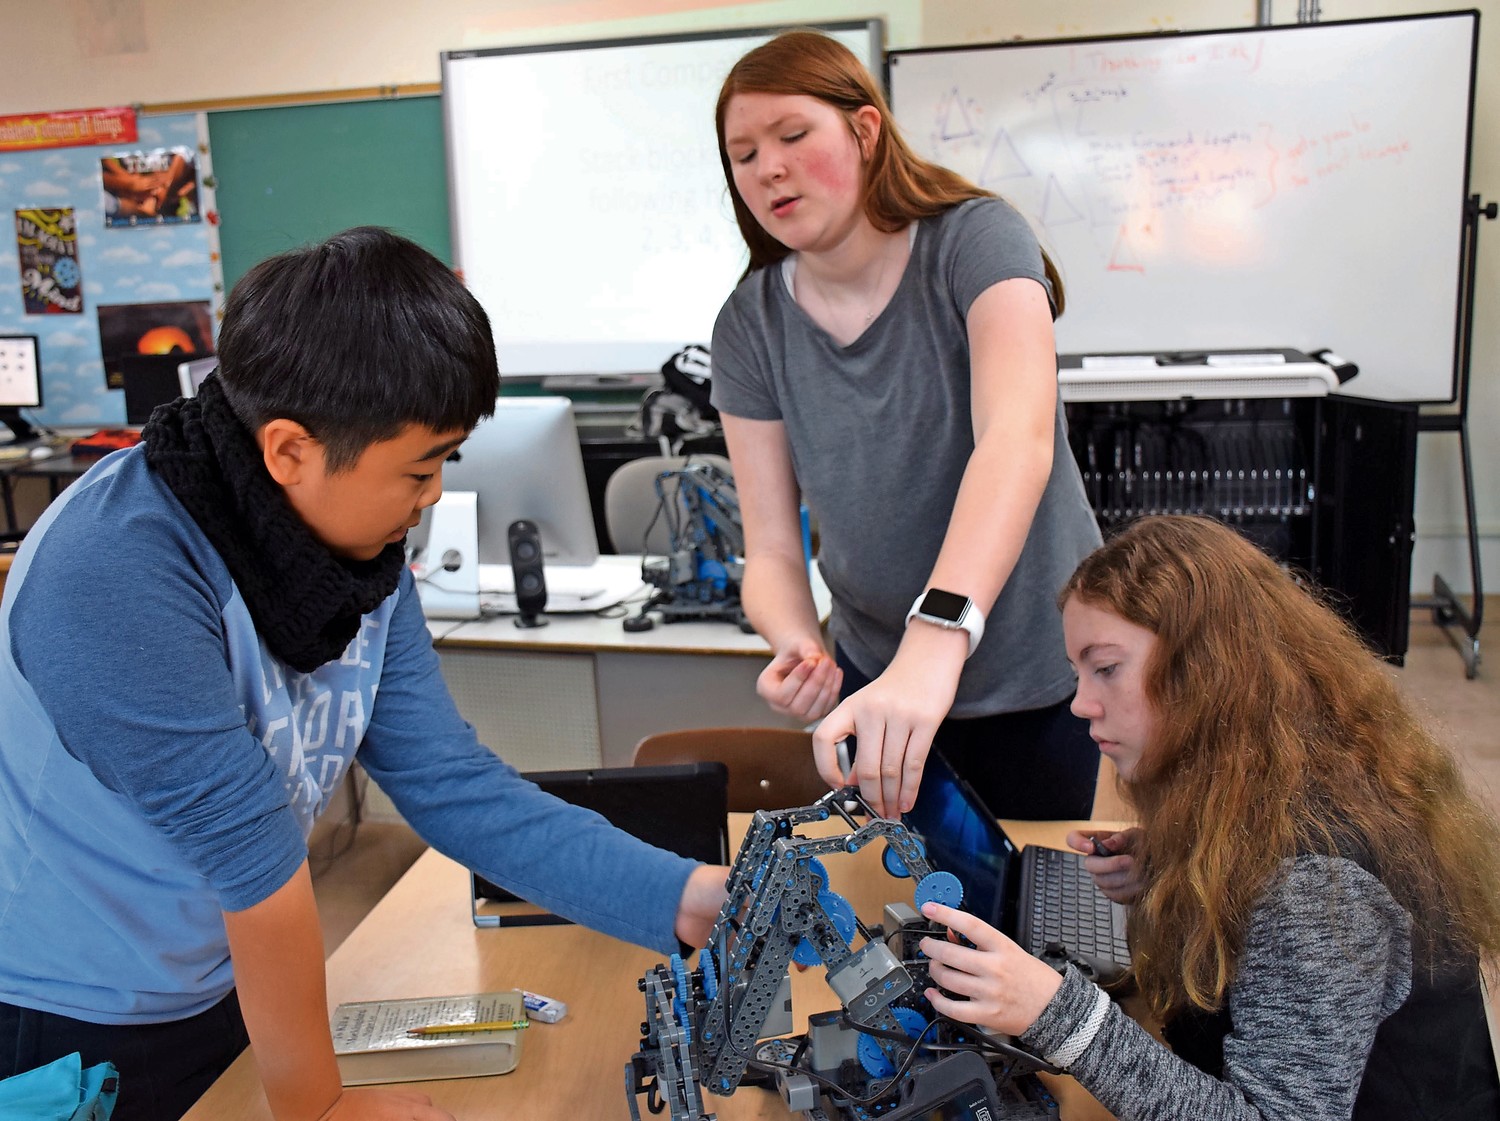 Hyosung Yang, Sabrina Joerg and Jessica Augustin, right, went to work building their latest robot.